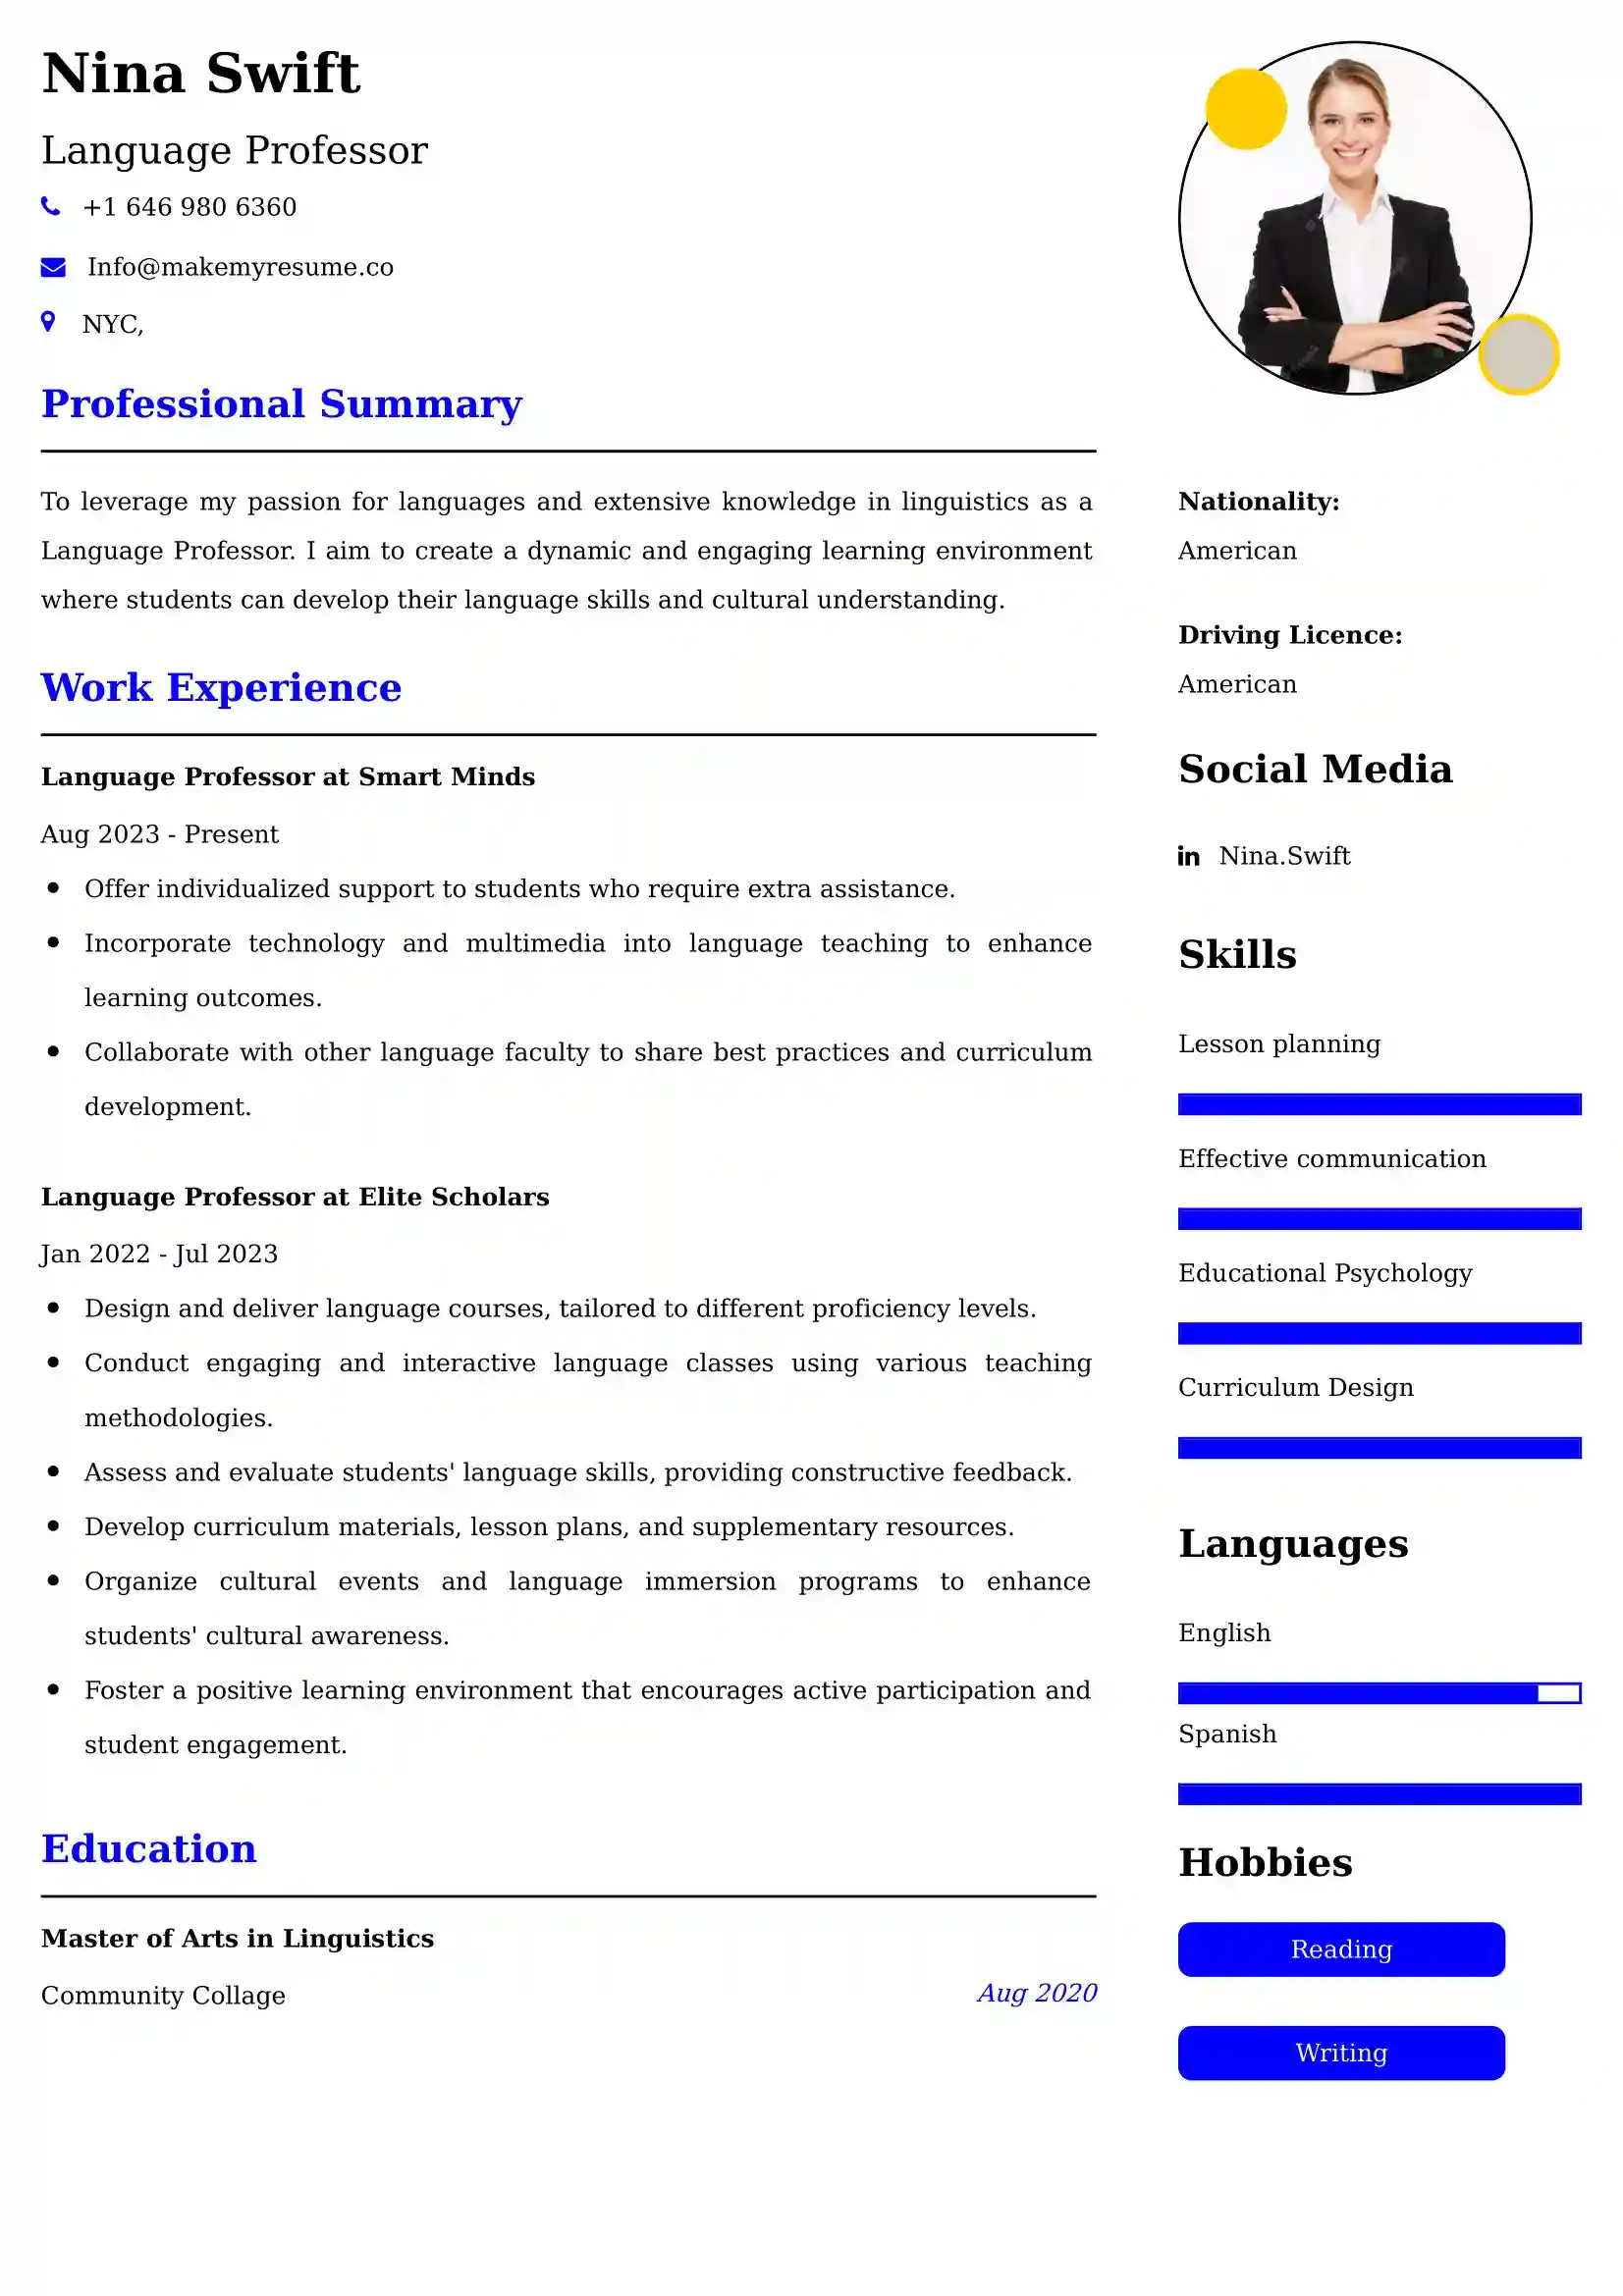 Language Professor Resume Examples for UK Jobs - Tips and Guide